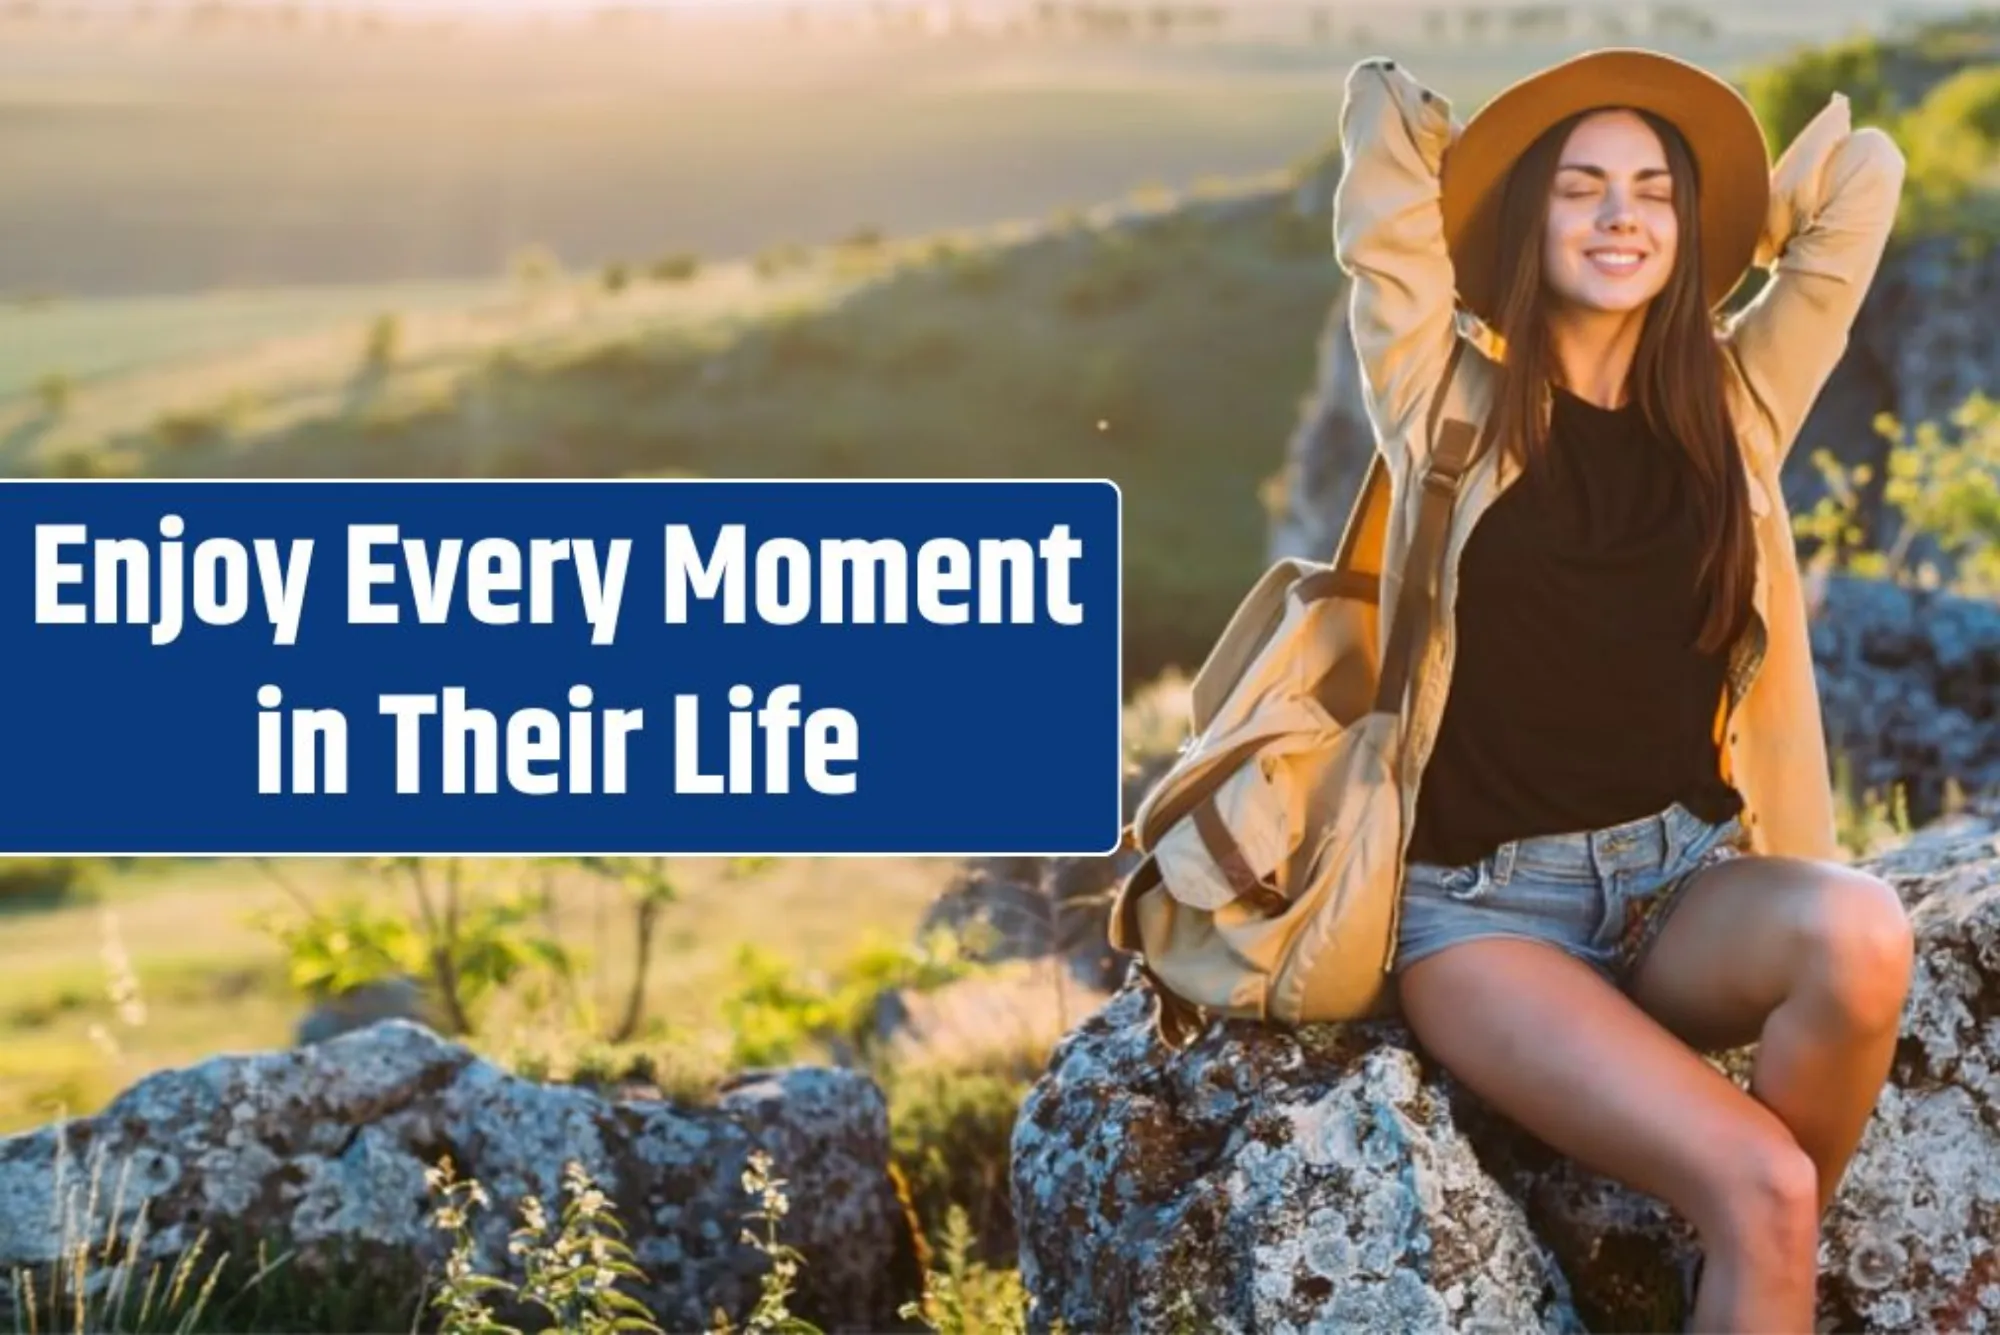 How to Enjoy Every Moment of Life